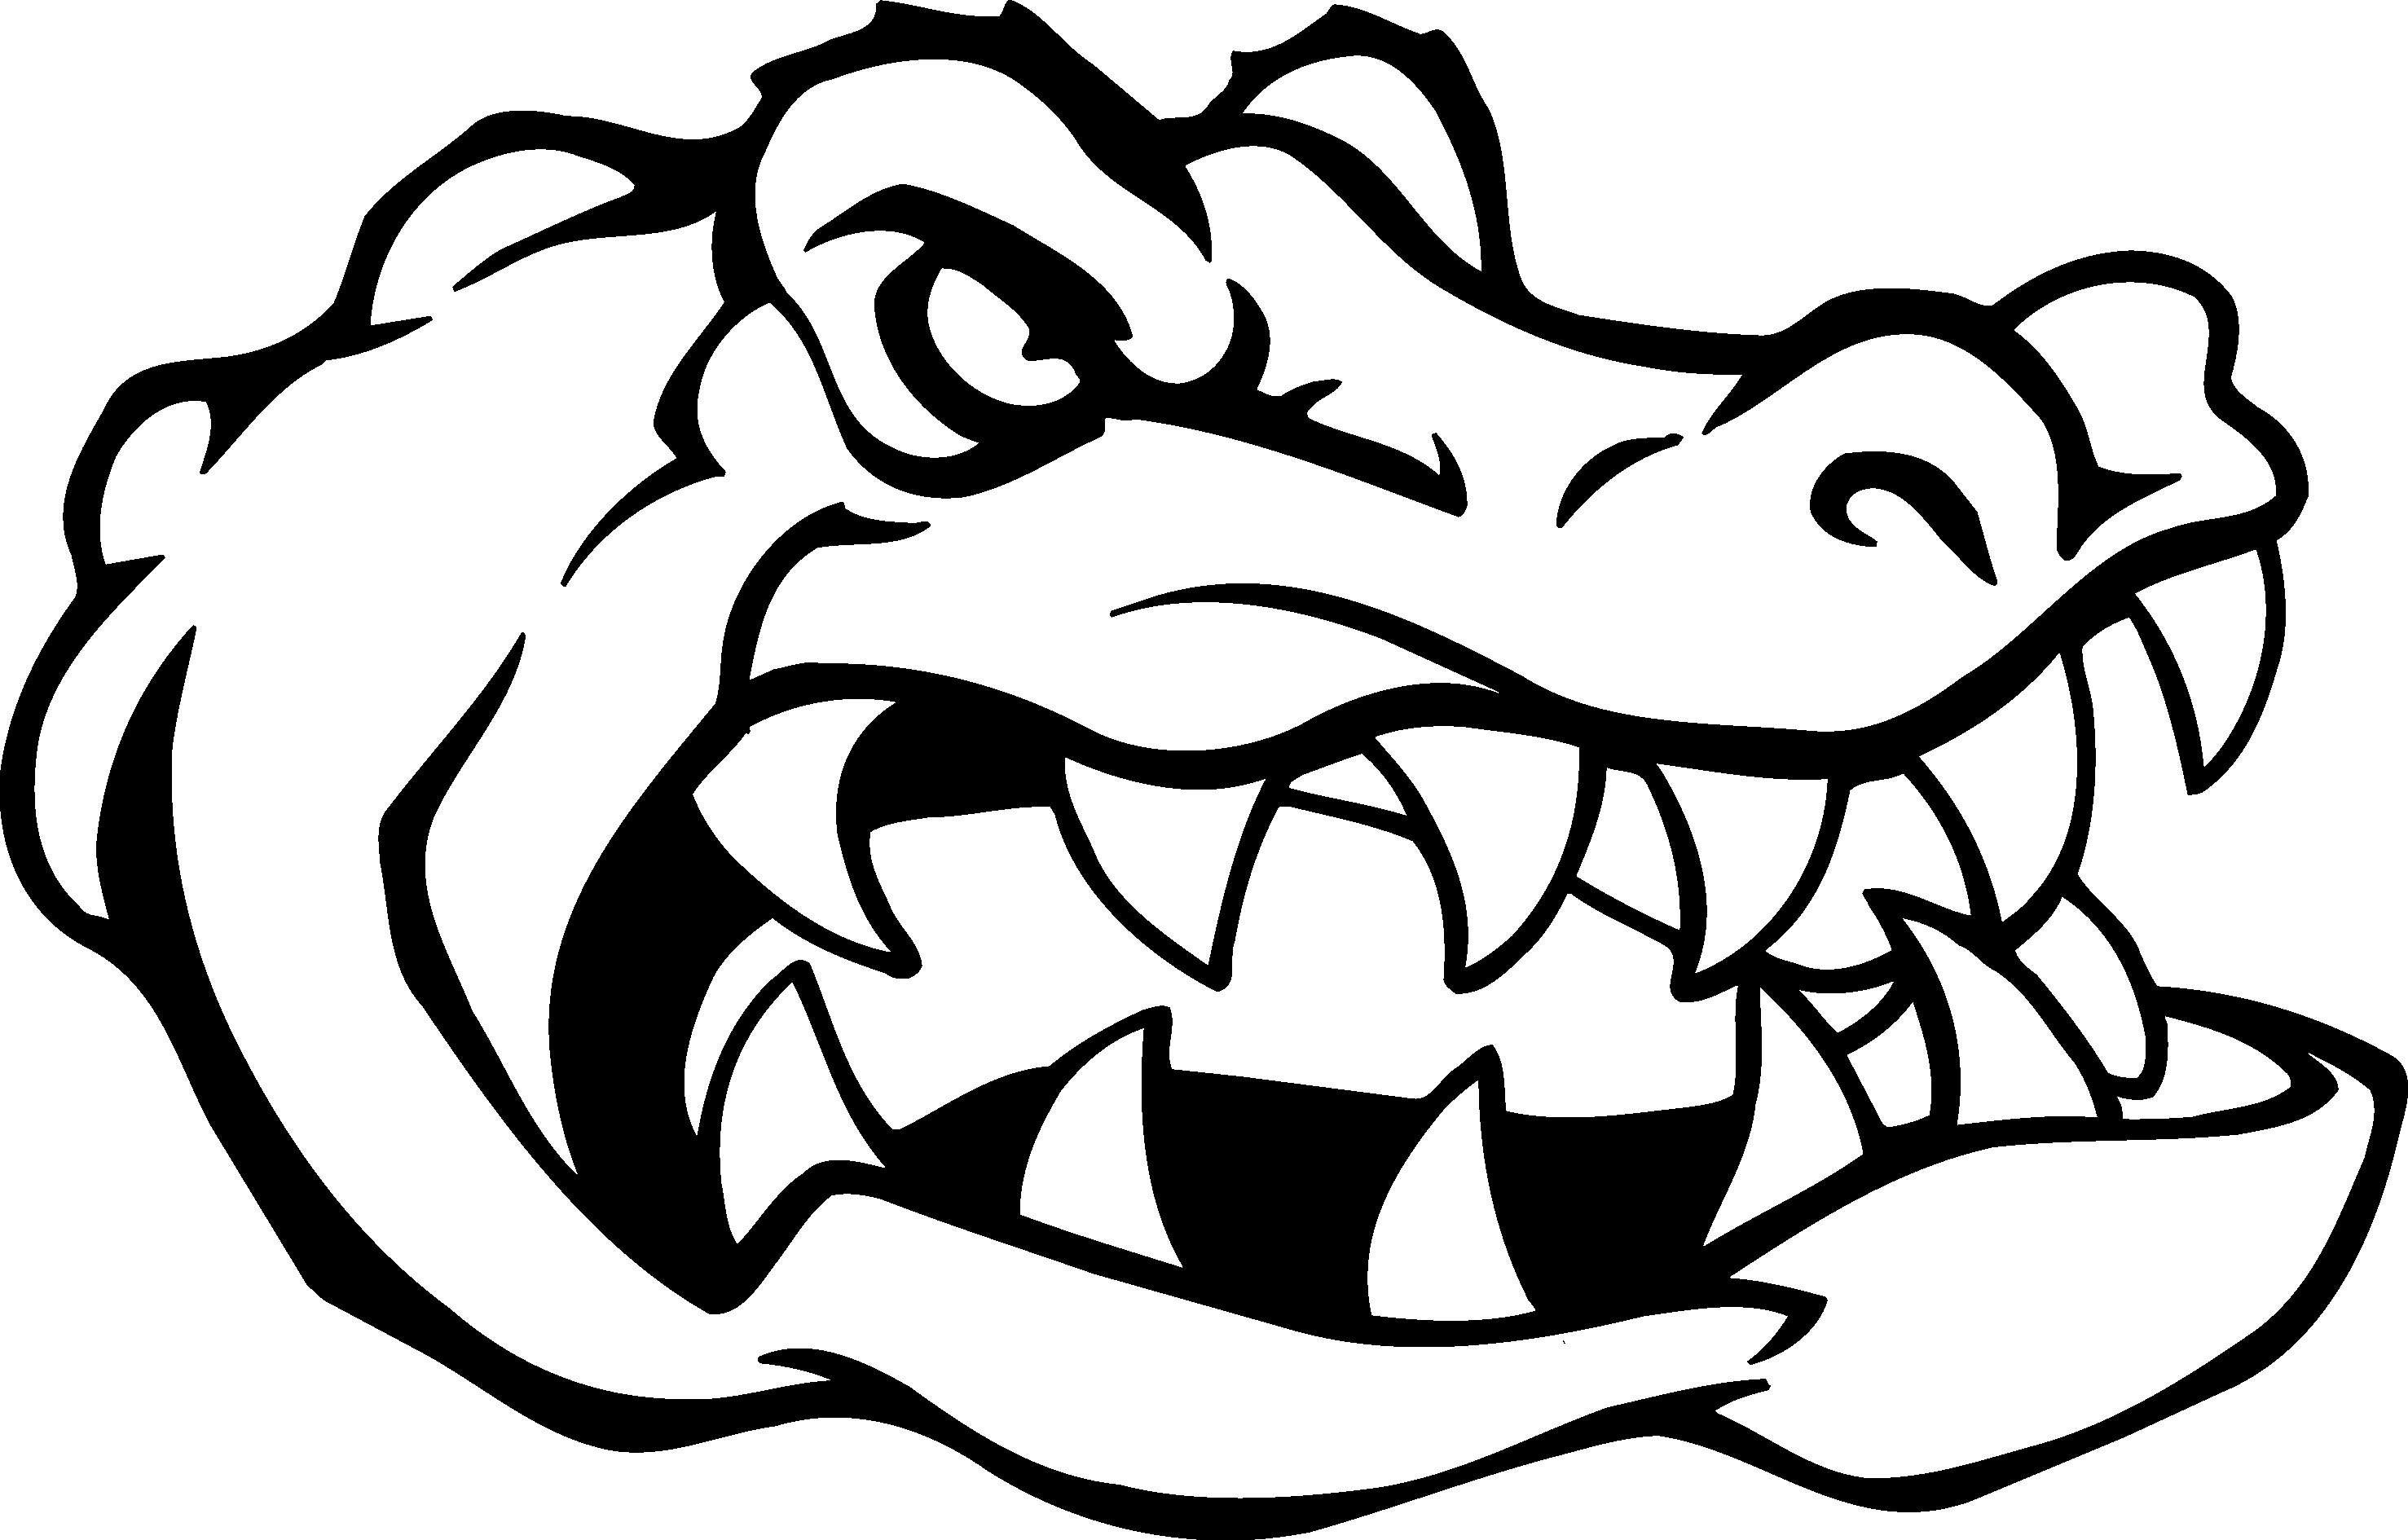 Free Gator Clipart Black And White, Download Free Gator Clipart Black